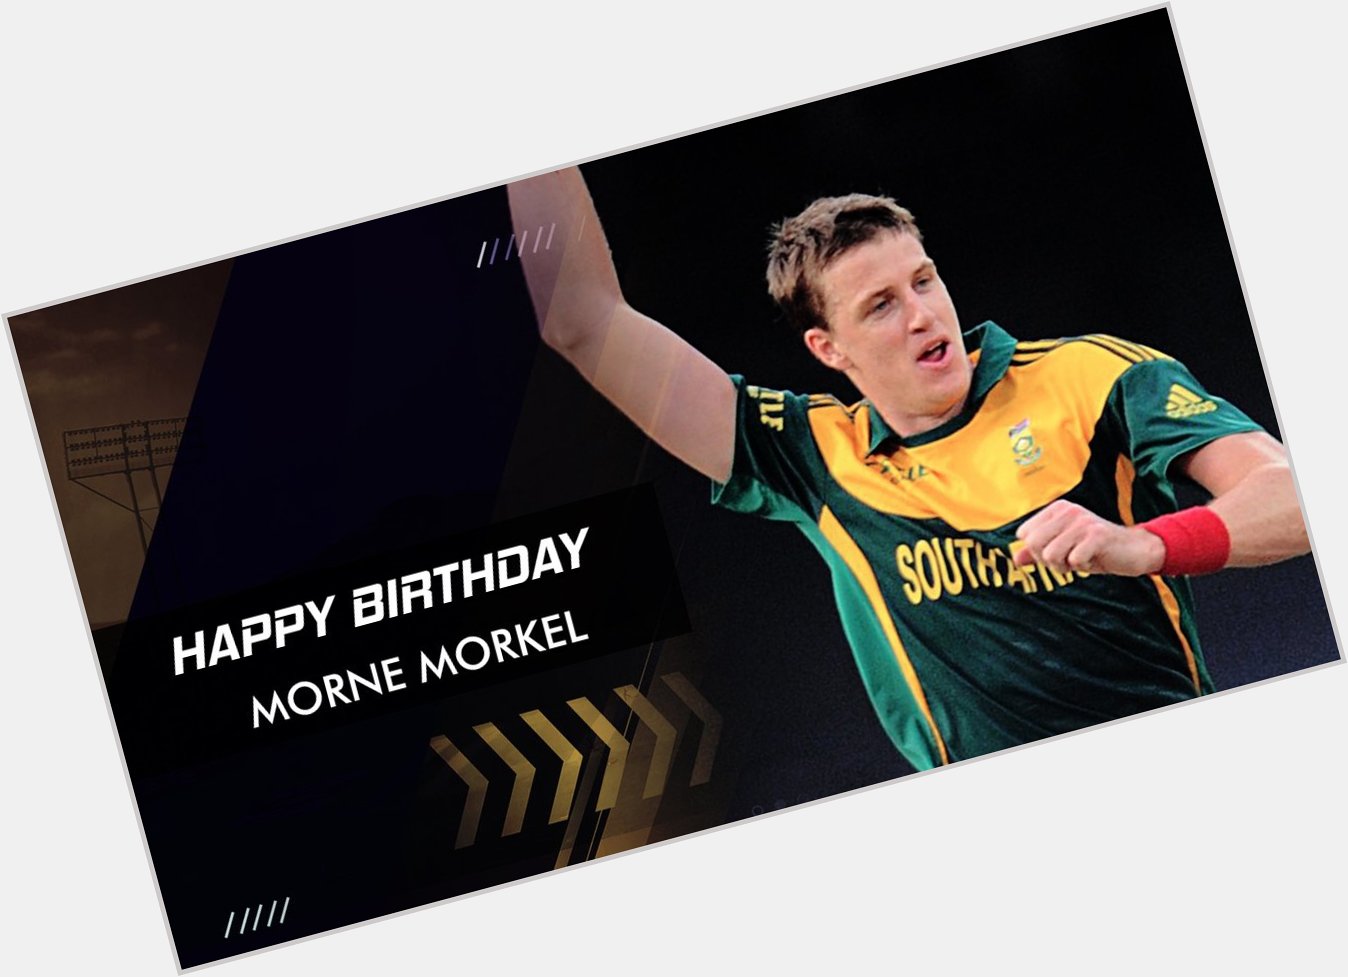 Happy Birthday!! Morne Morkel

Former South African Right-Arm Fast Bowler 